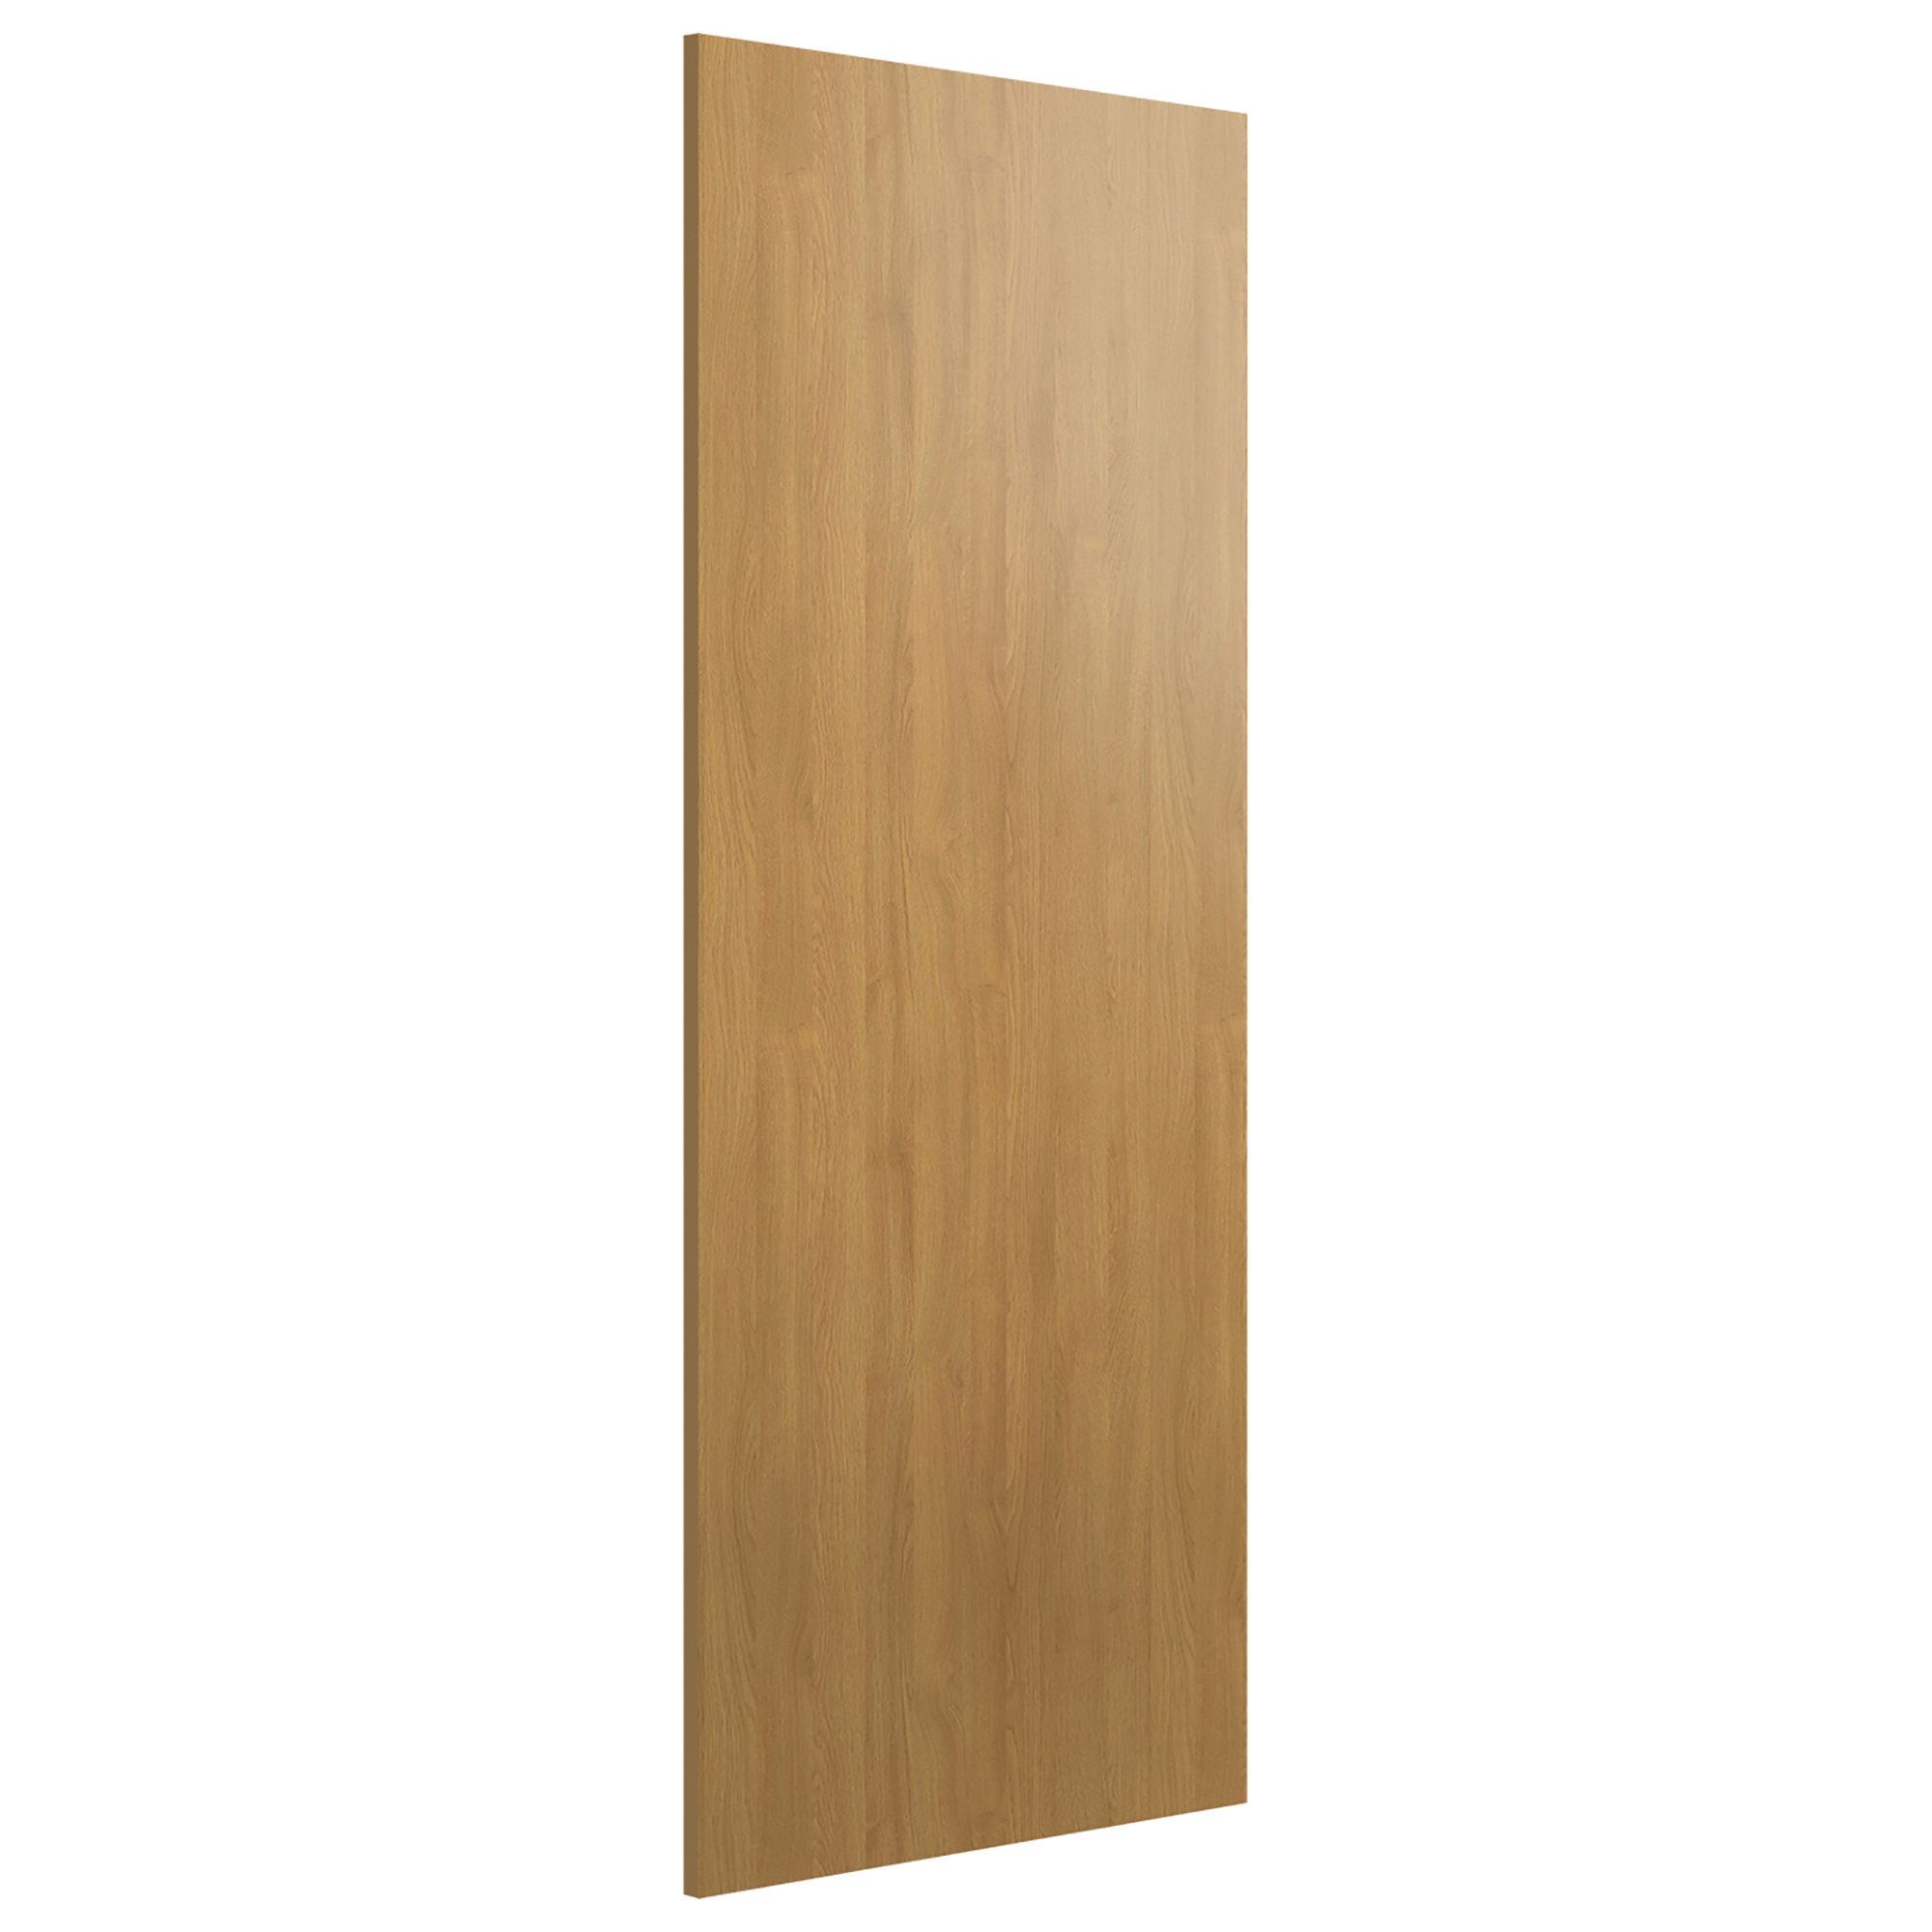 Image of Spacepro Wardrobe End Panel Oak - 2800mm x 620mm x 18mm with Fixing Blocks